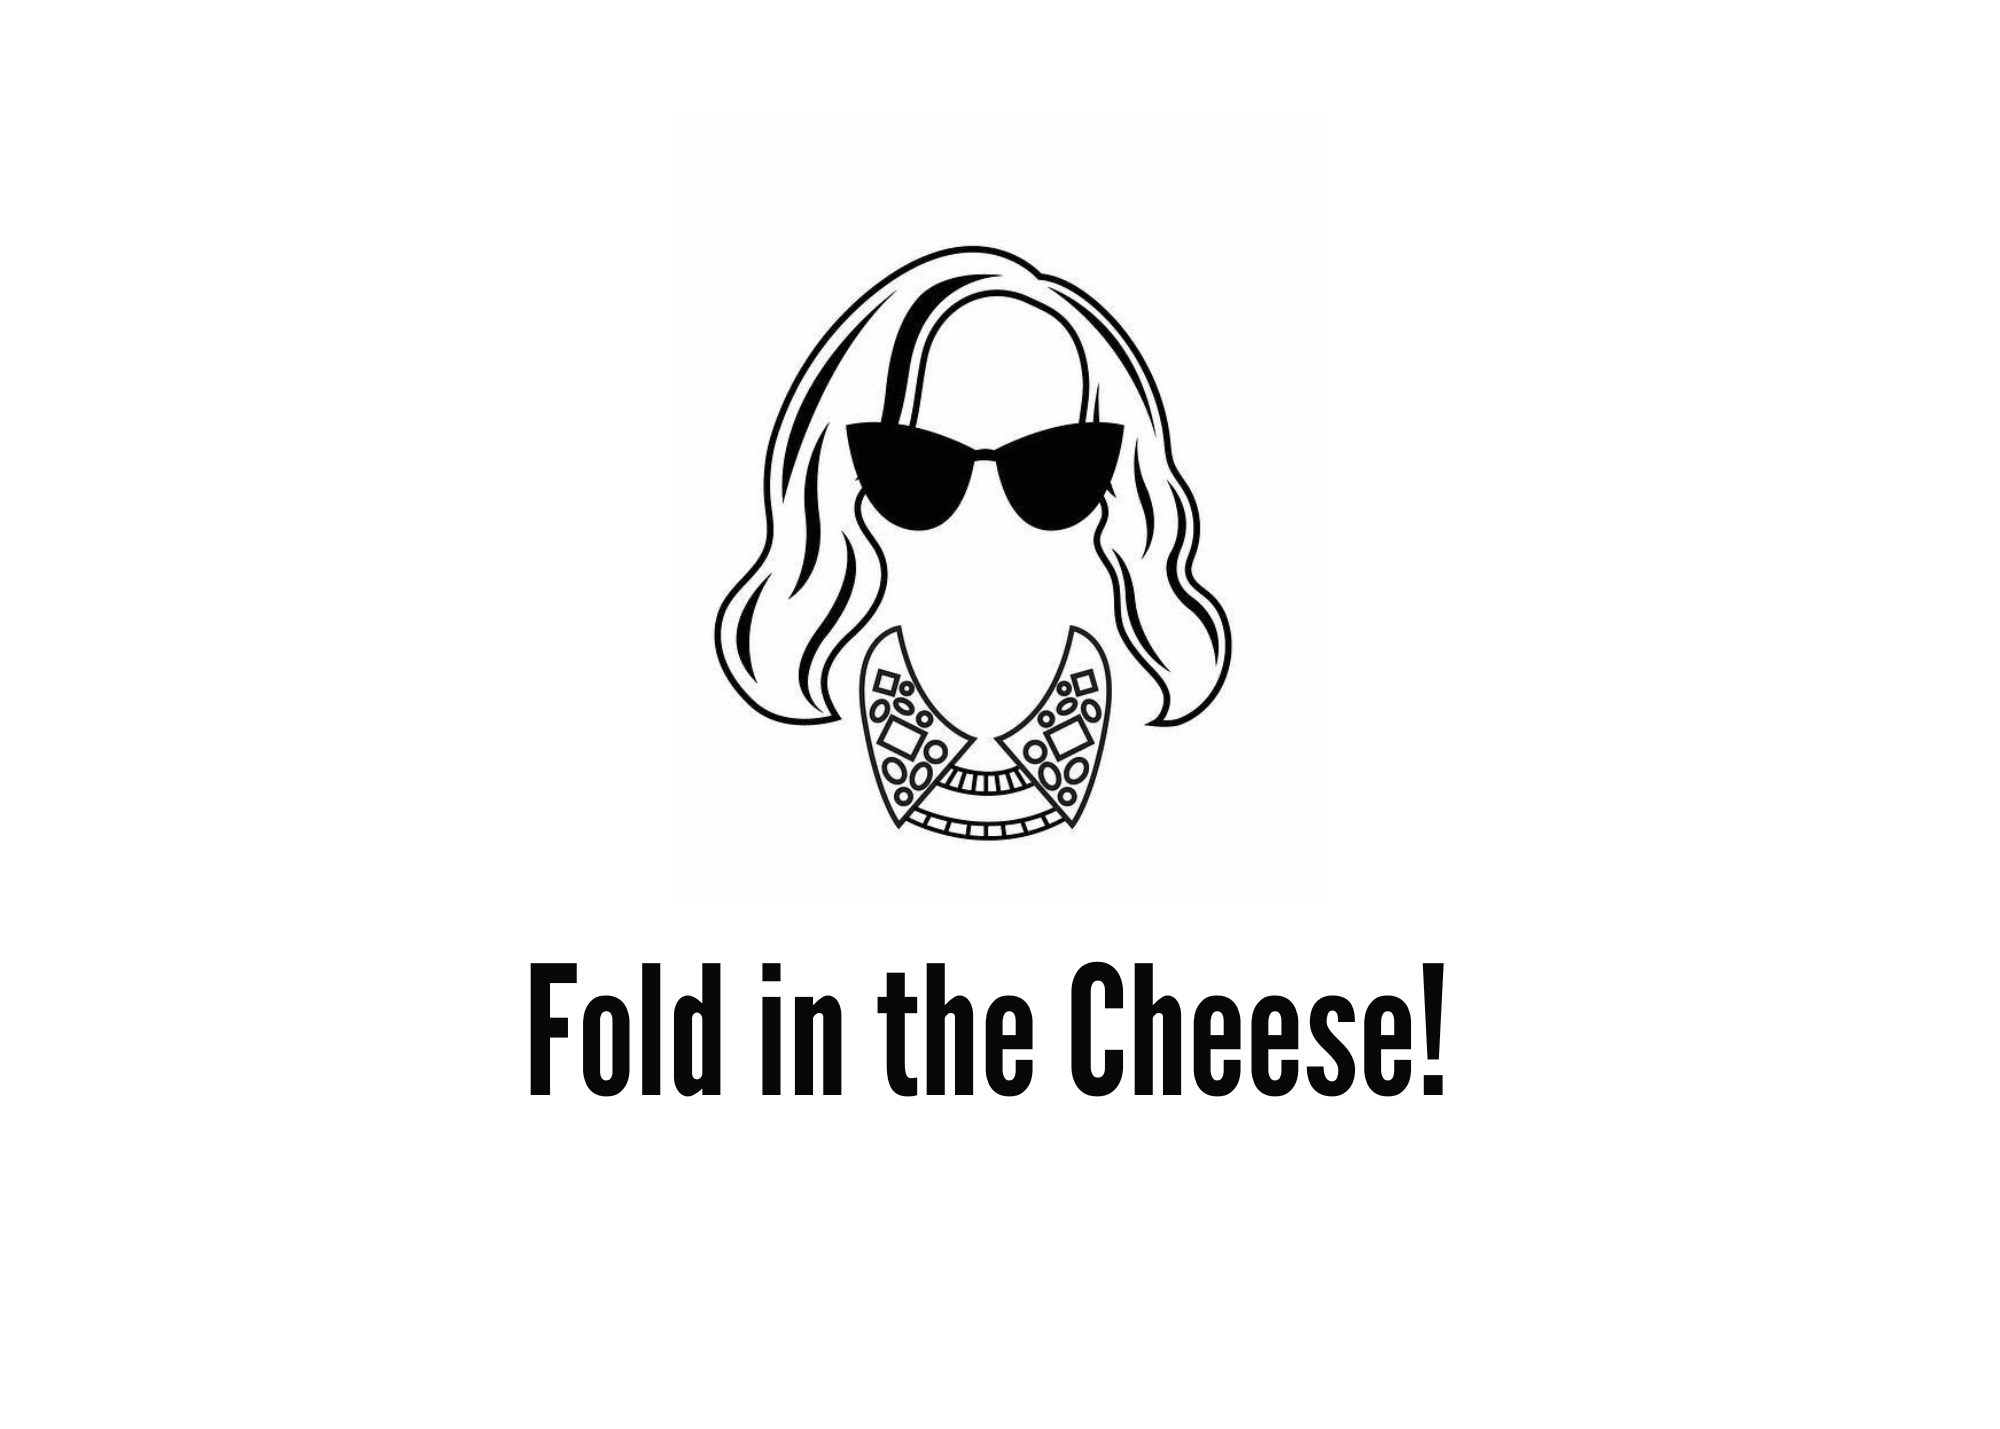 White seed paper greeting card with Moira saying "Fold in the cheese"